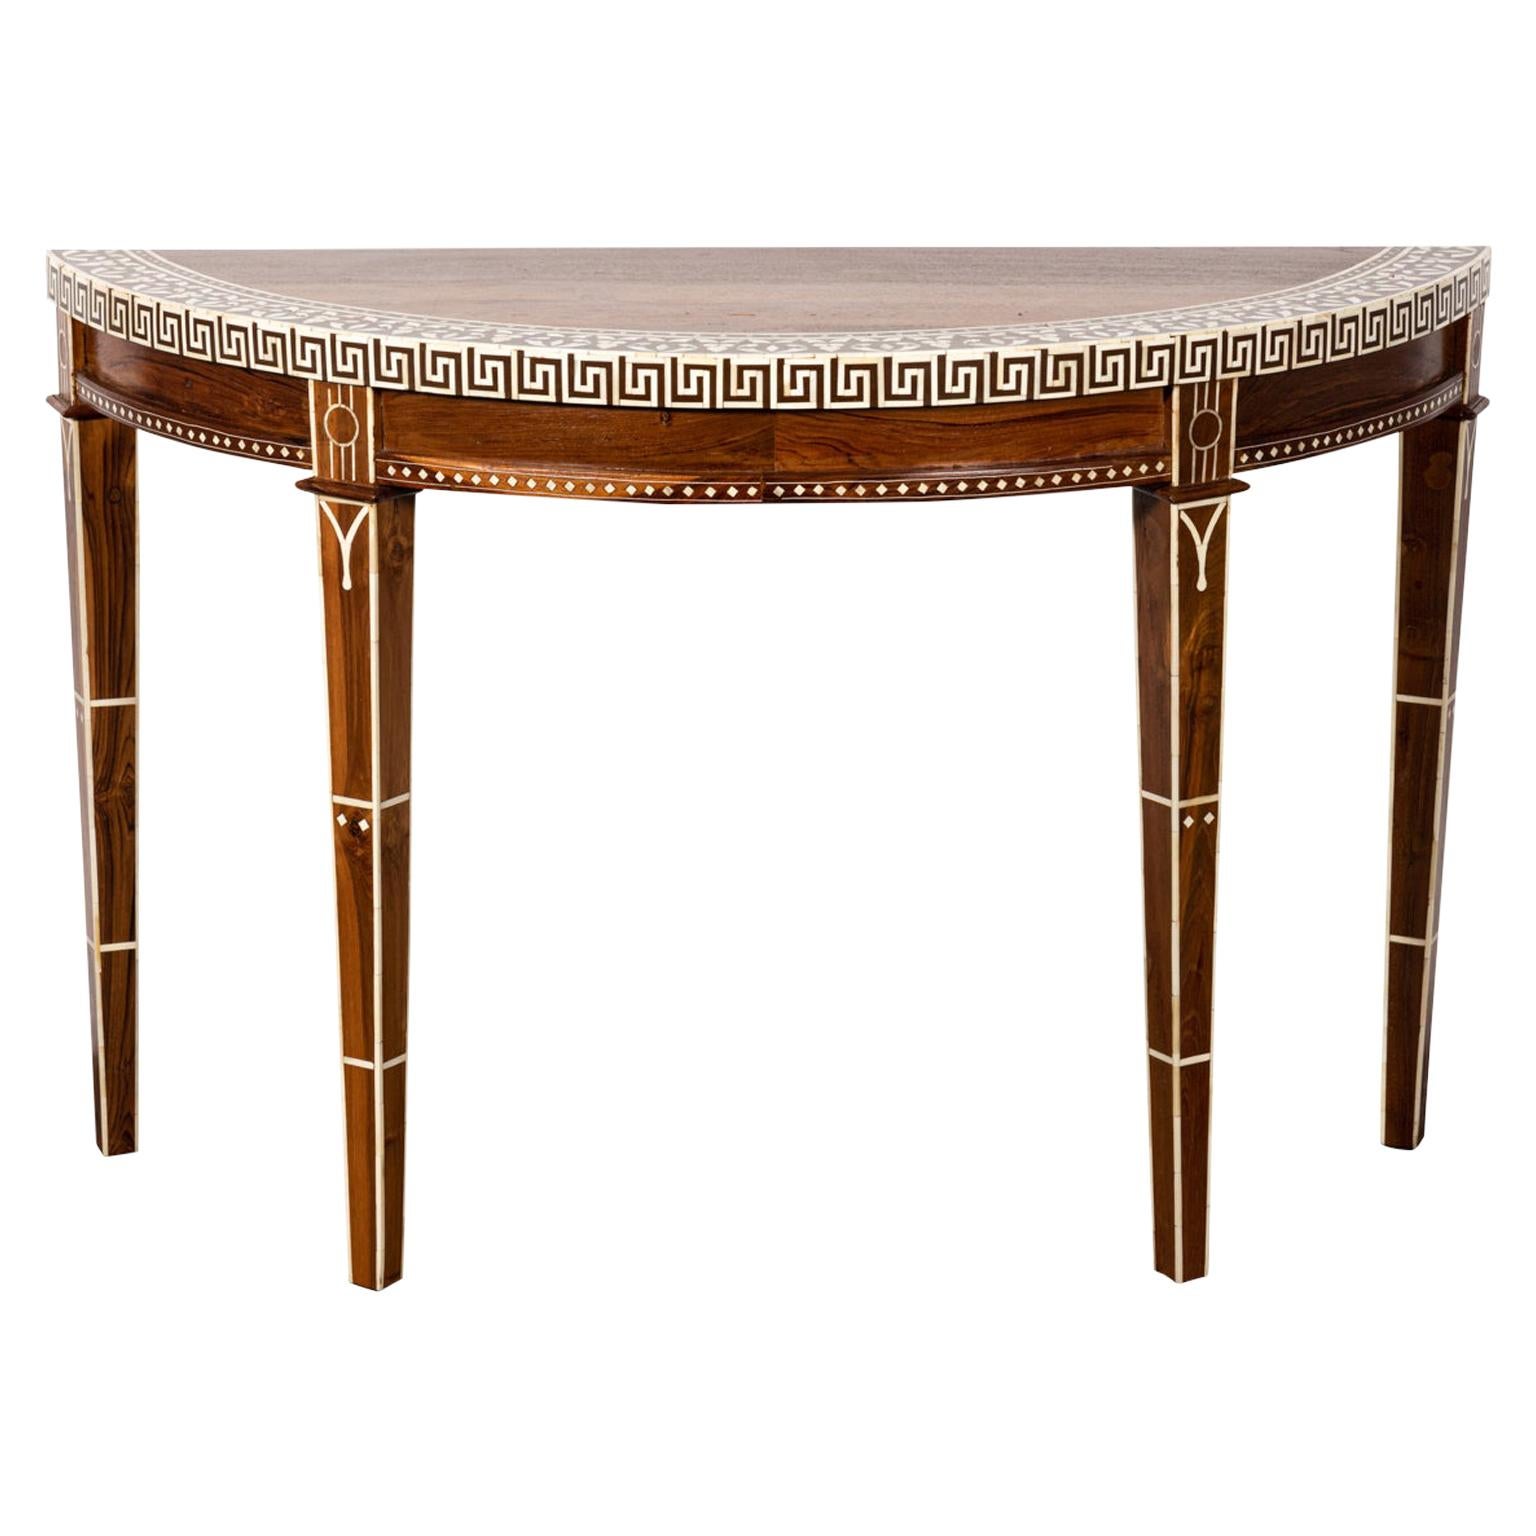 Wood and Bone Inlaid Demilune Console Table